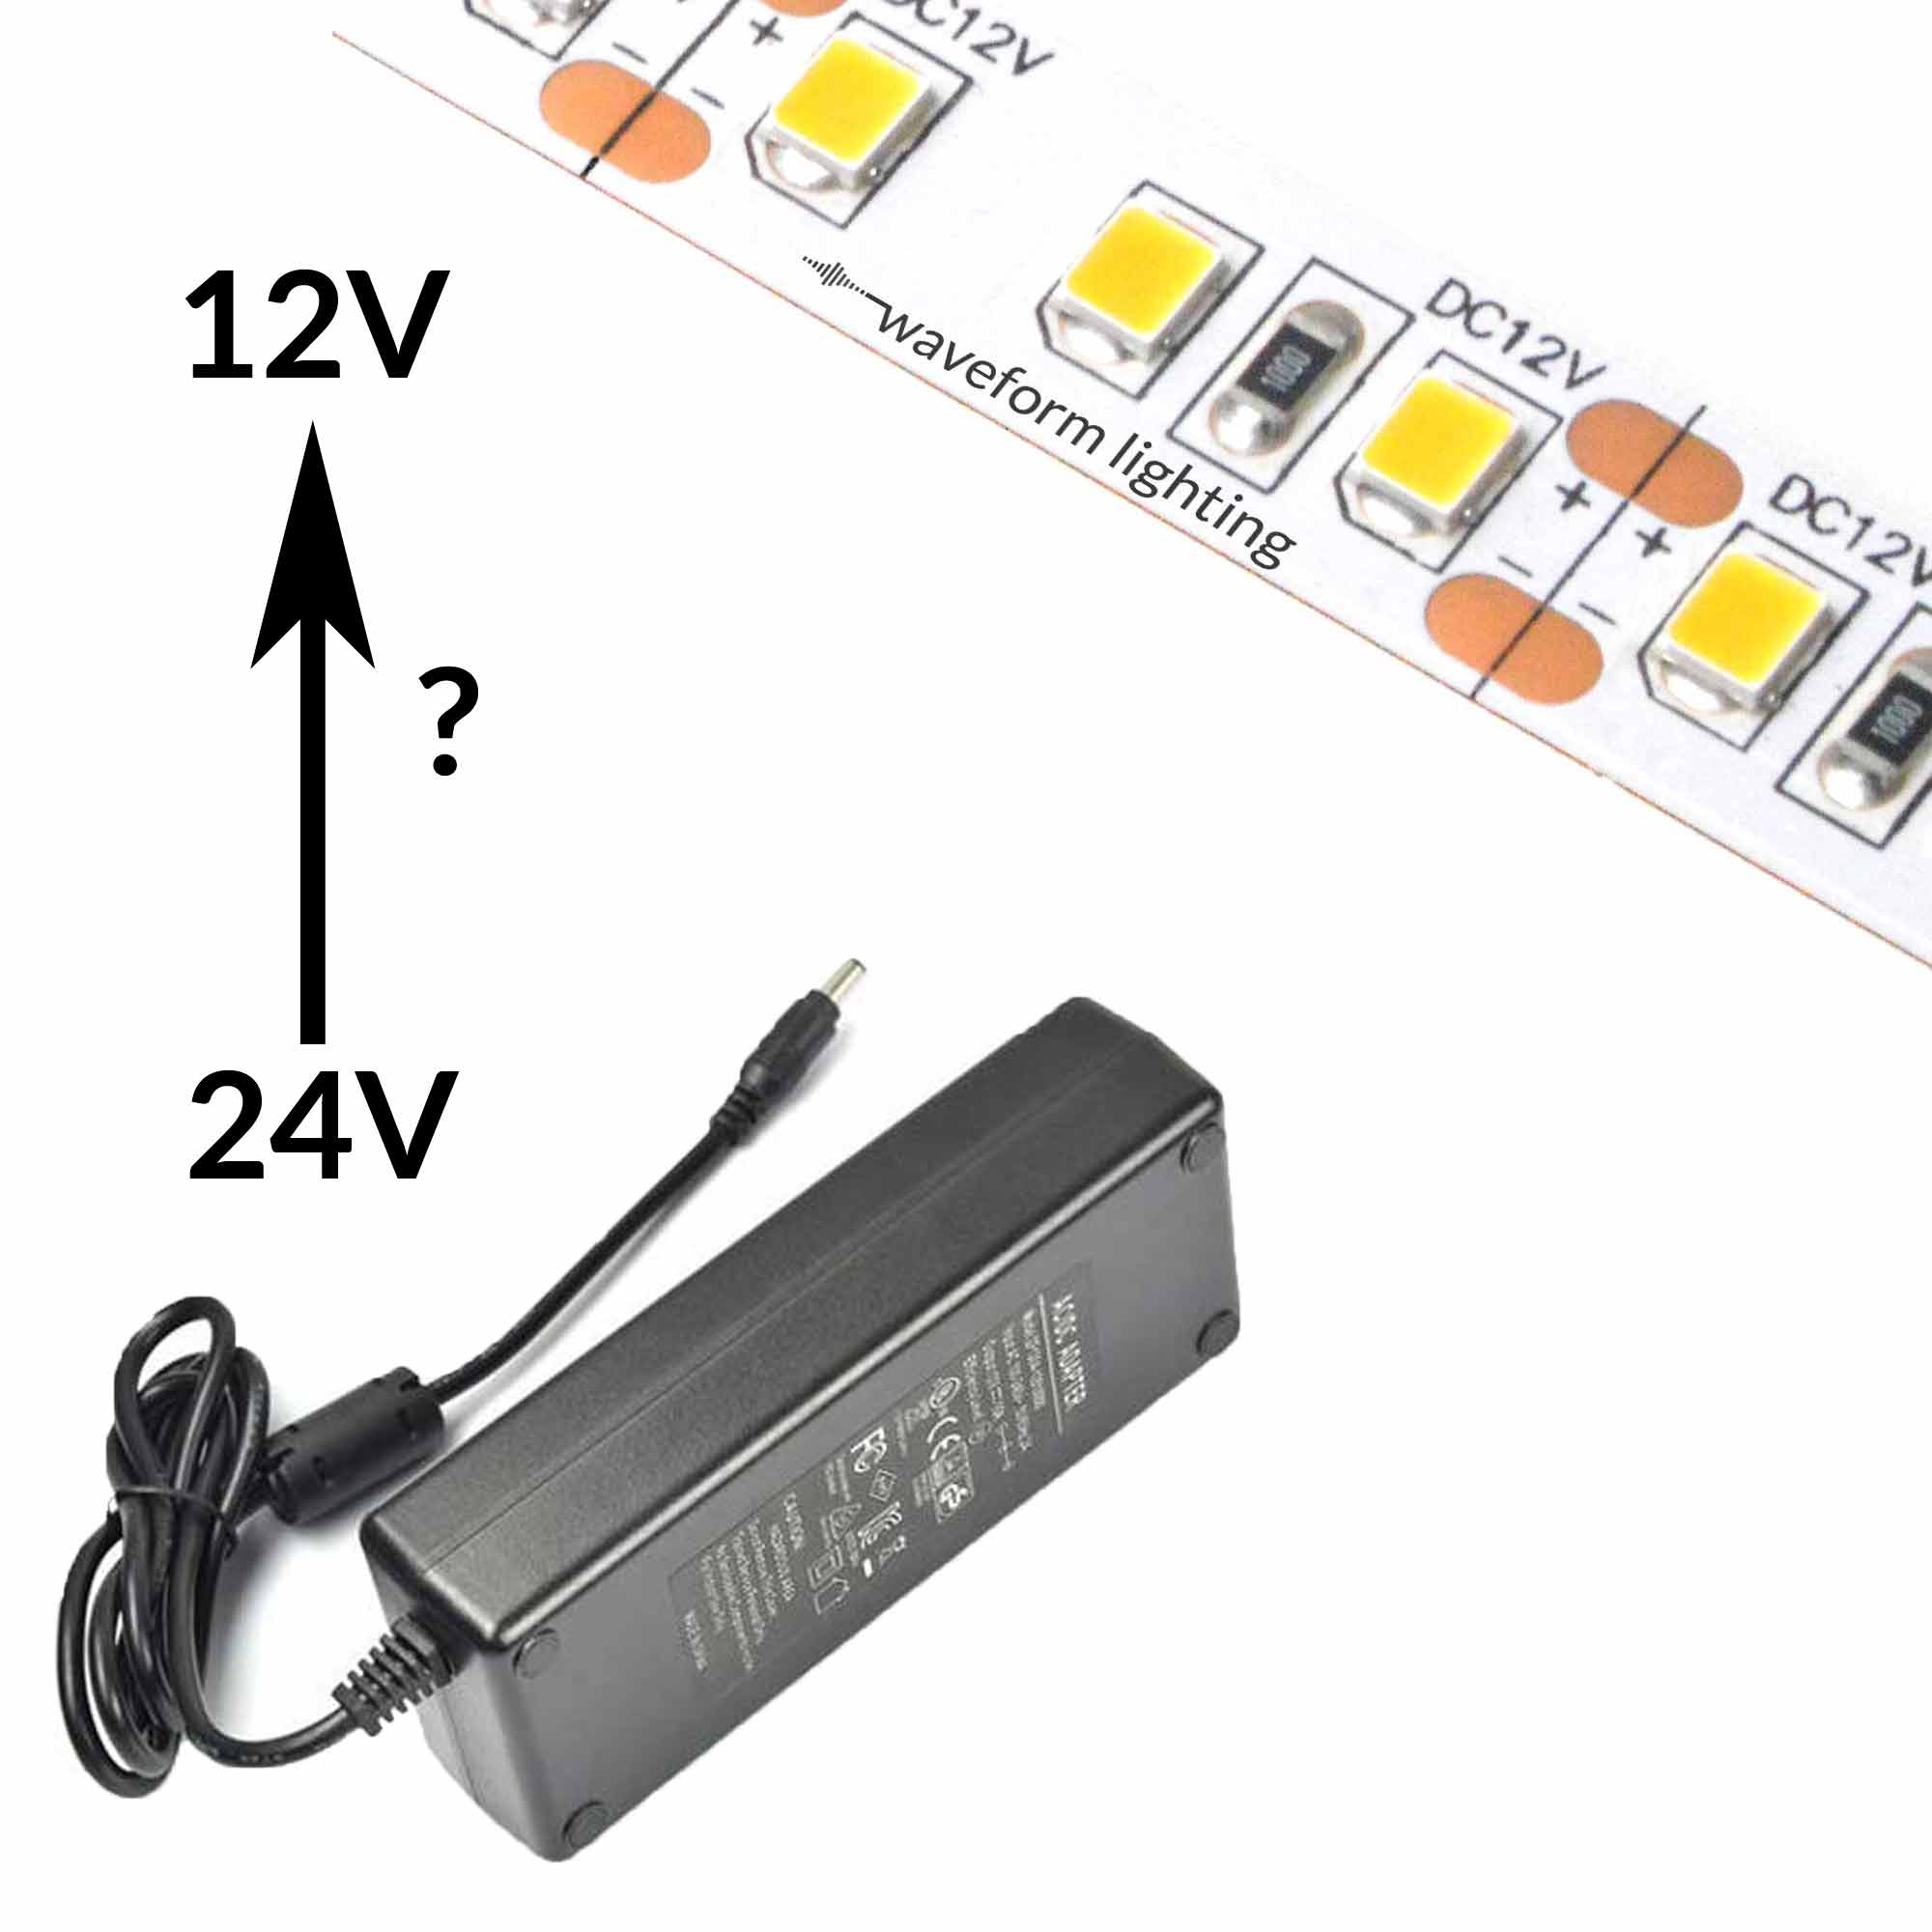 DC12V Plug On/Off Switch Connector for Single Color LED Strips 